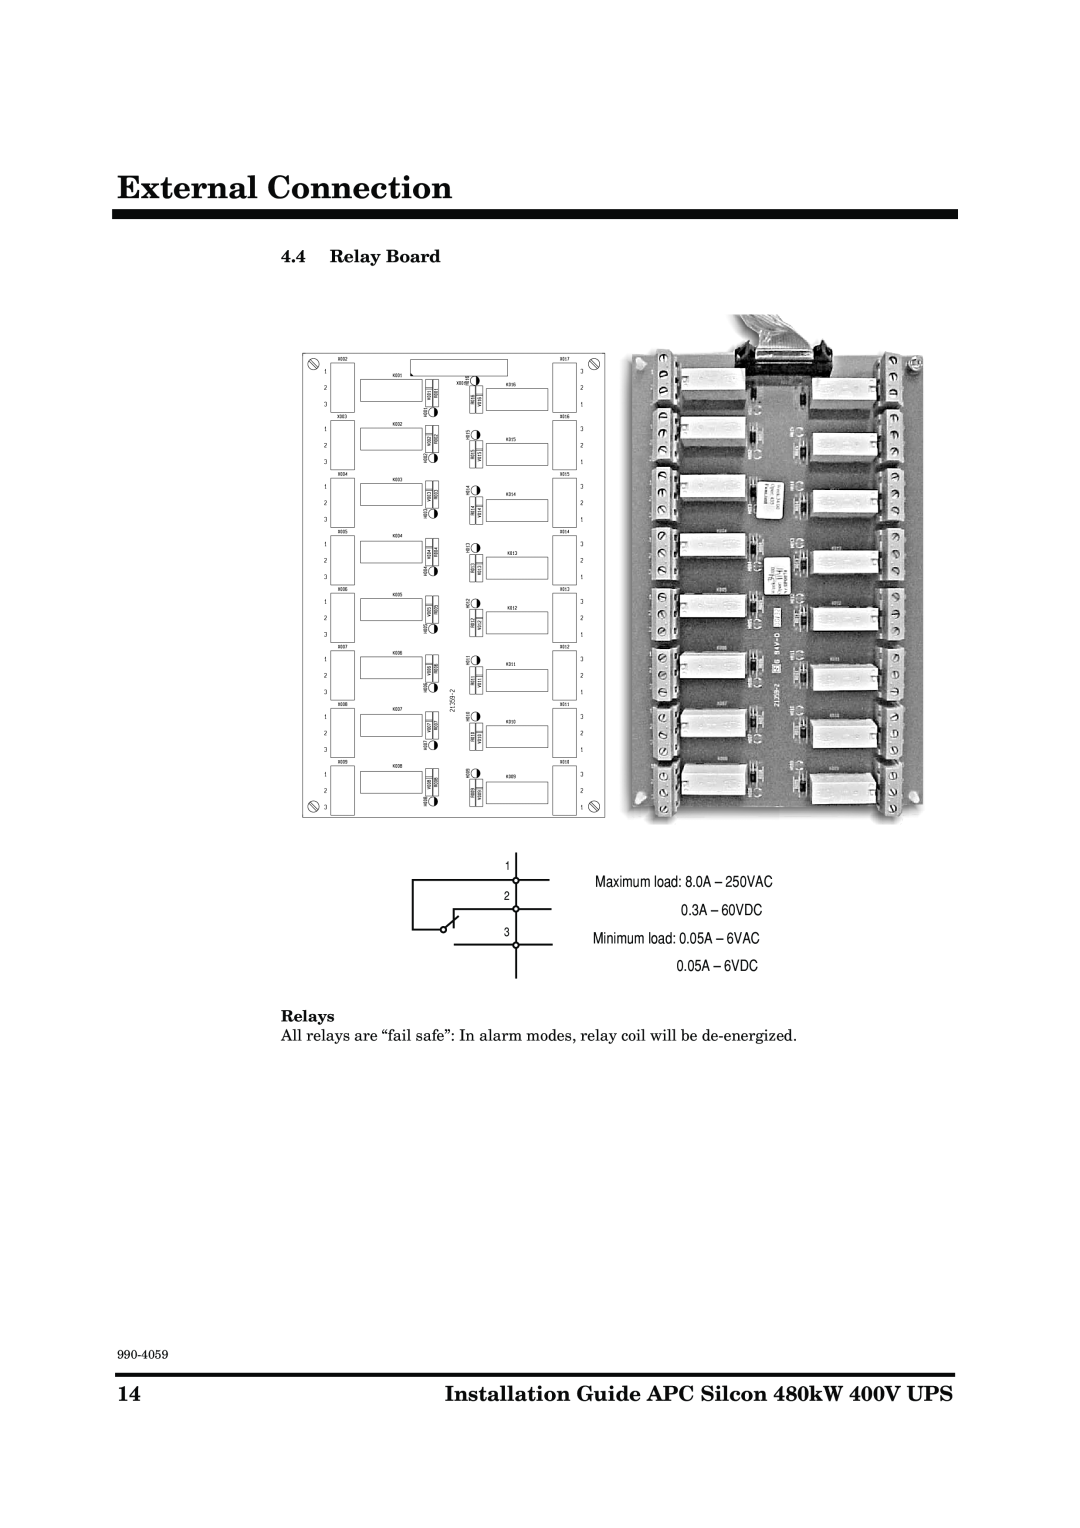 American Power Conversion 480kW 400V manual Relay Board, Relays, External Connection, 990-4059 